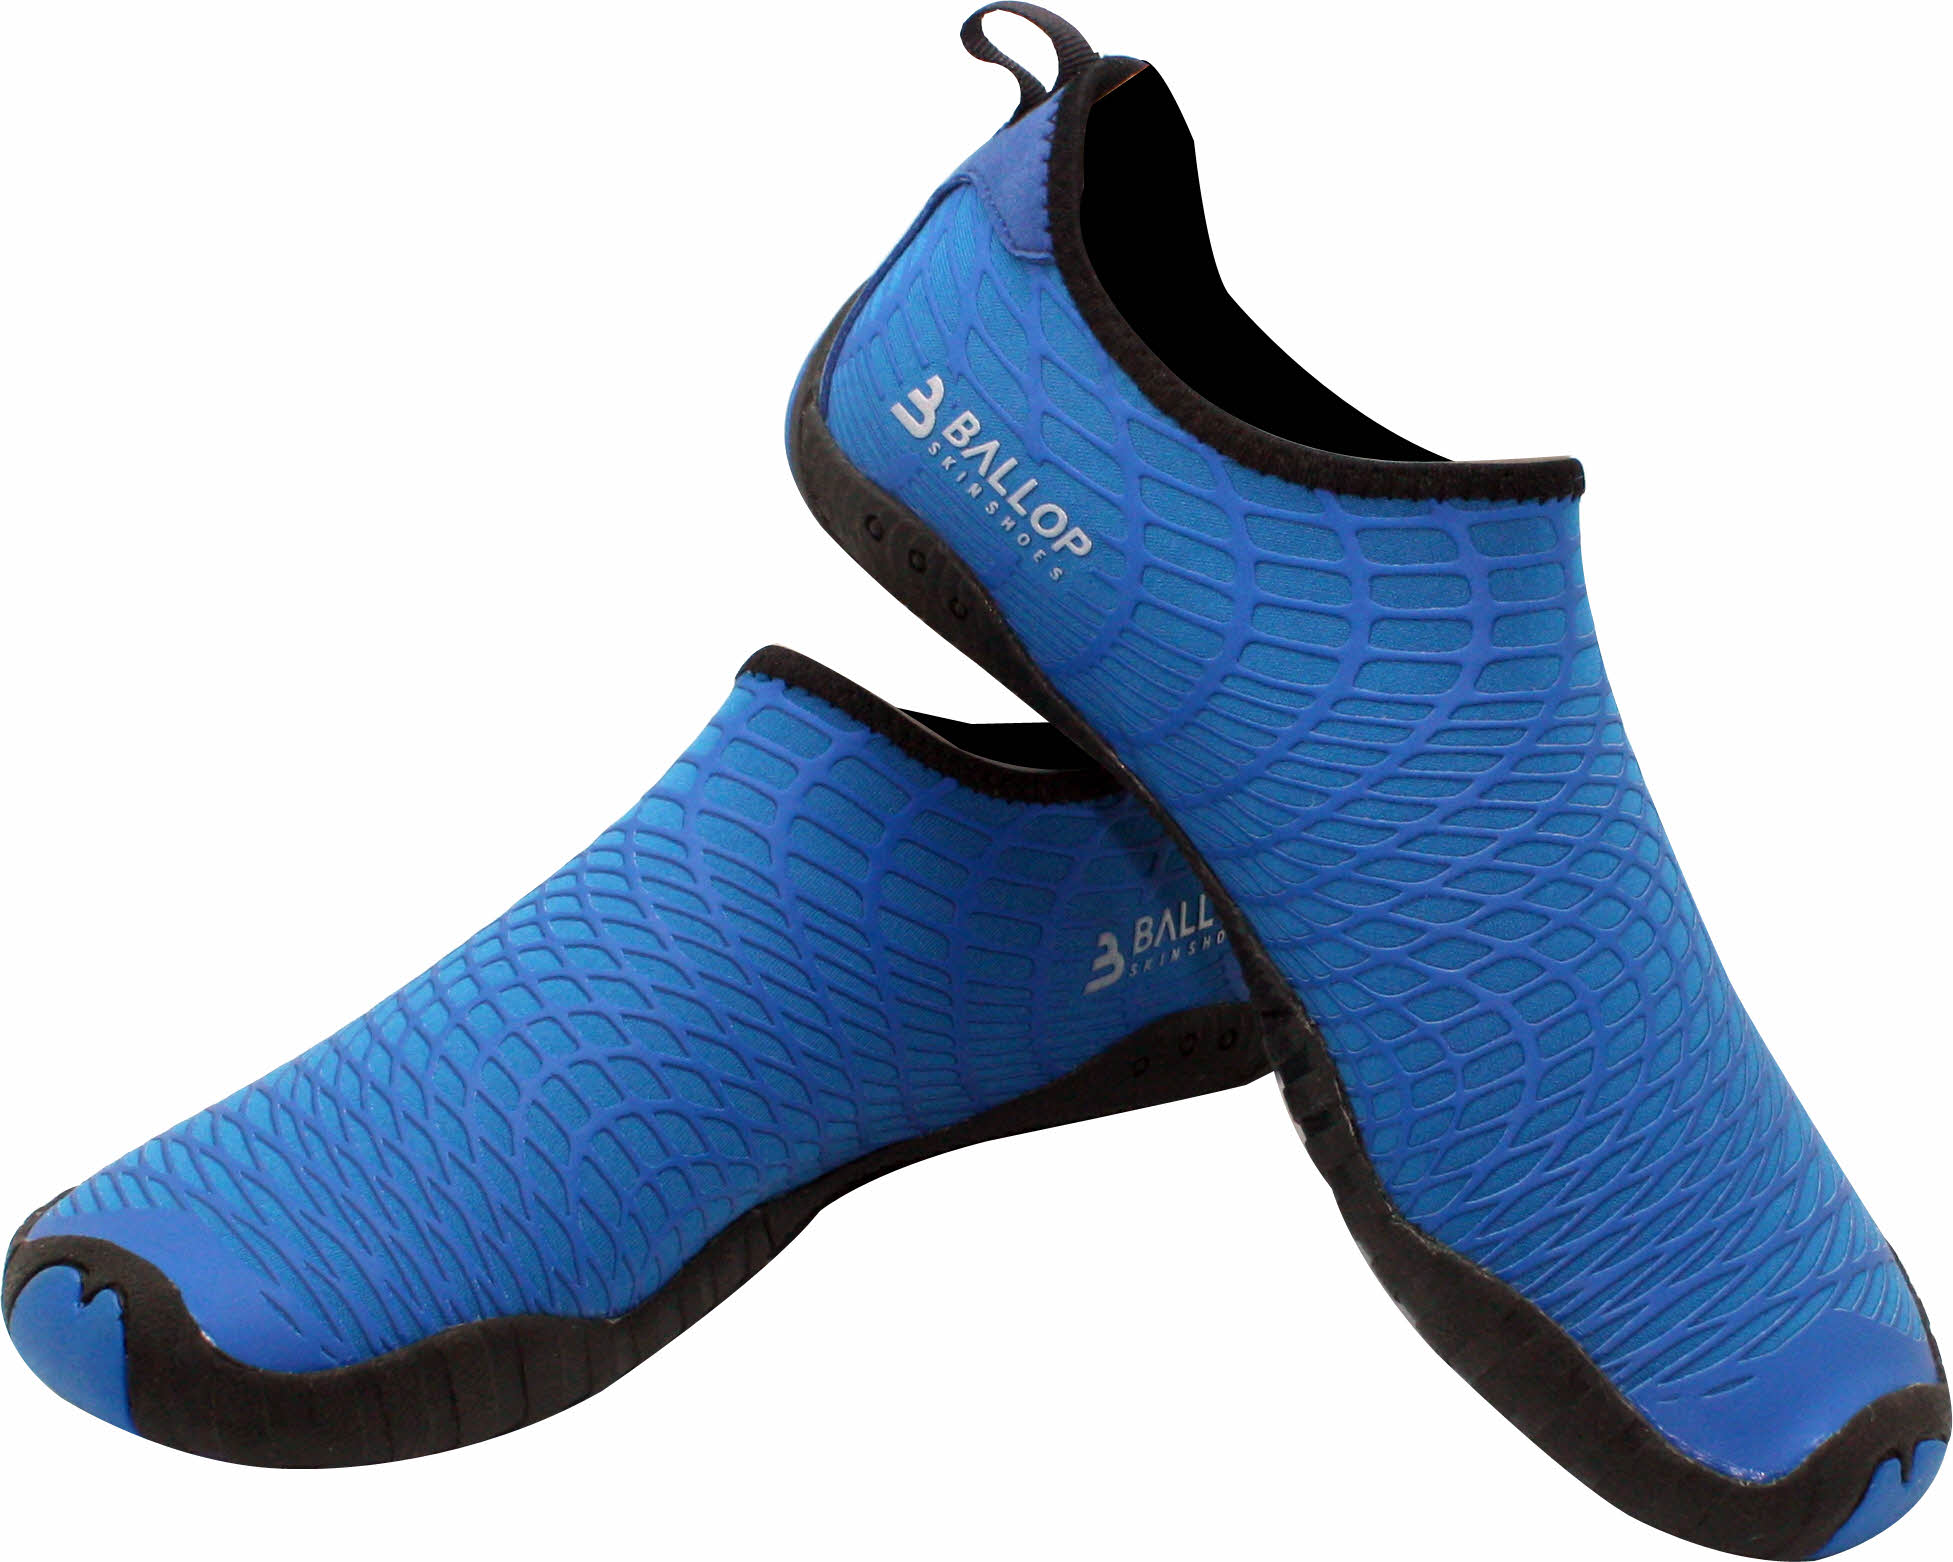 Aqua Shoes, Water Shoes, Surfing Shoes, Fitenss Shoes, Gym Shoes, Yoga ...